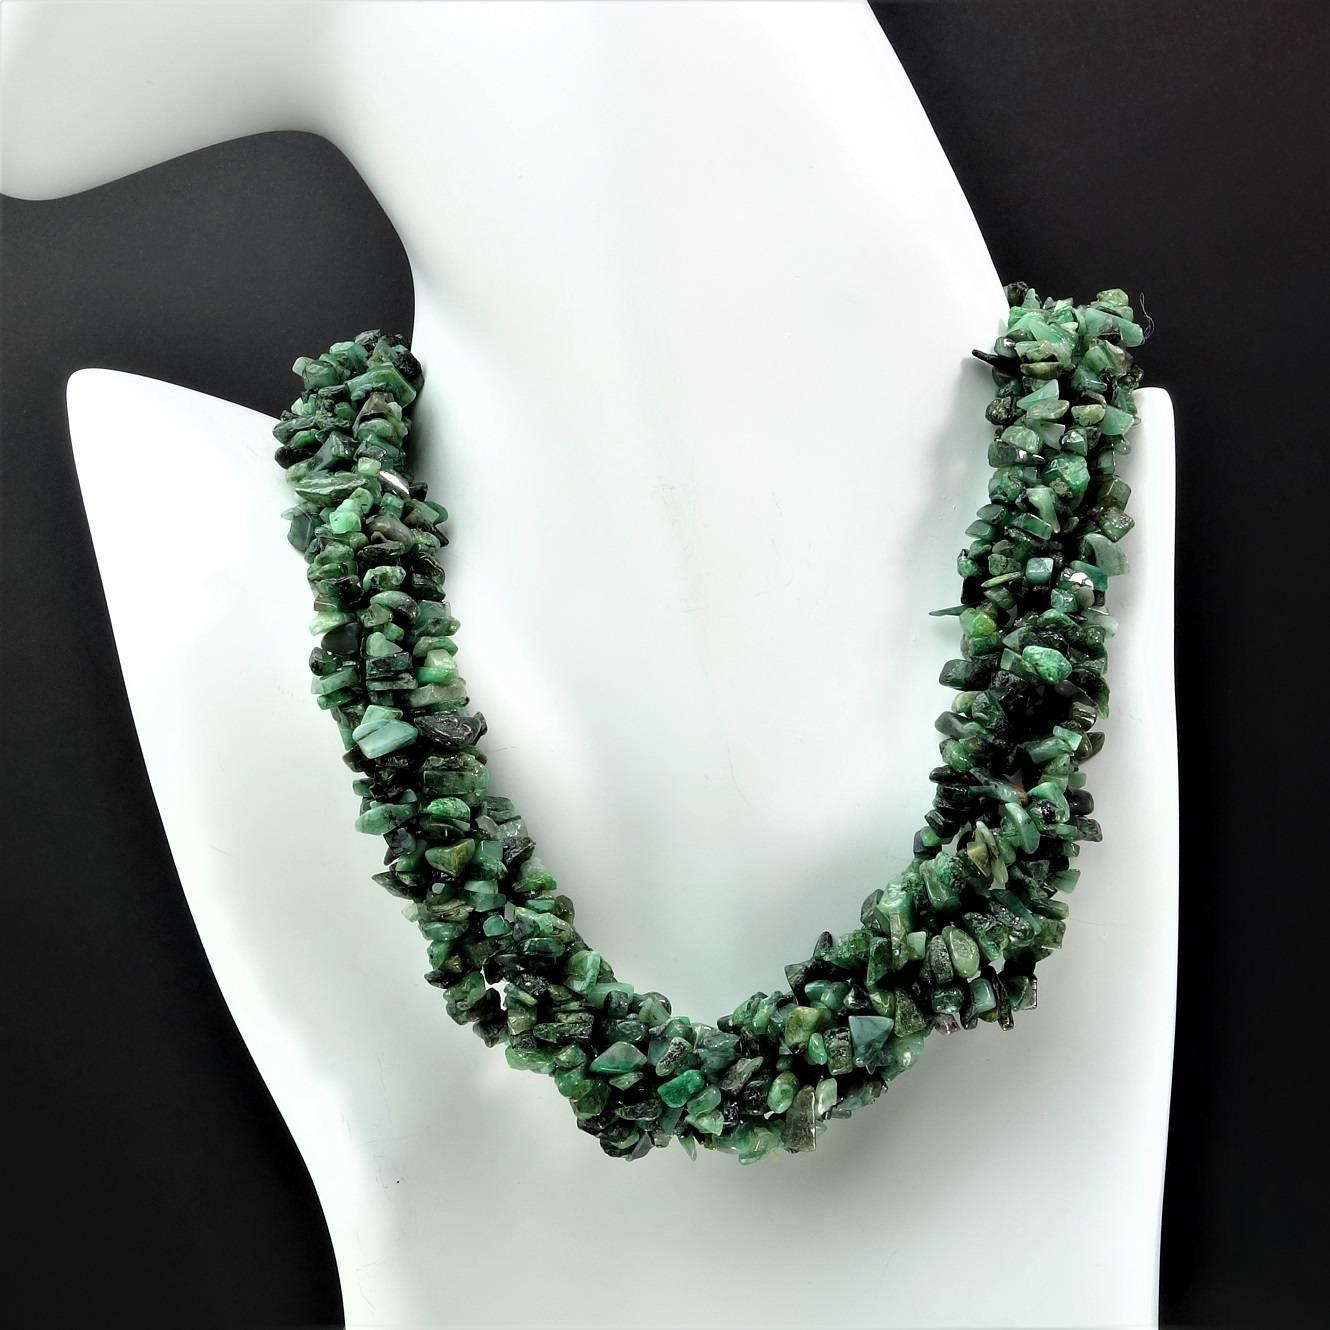 Great Mother's Day gift!  Emerald is the May birthstone.
Emerald chip necklace consisting of three 33